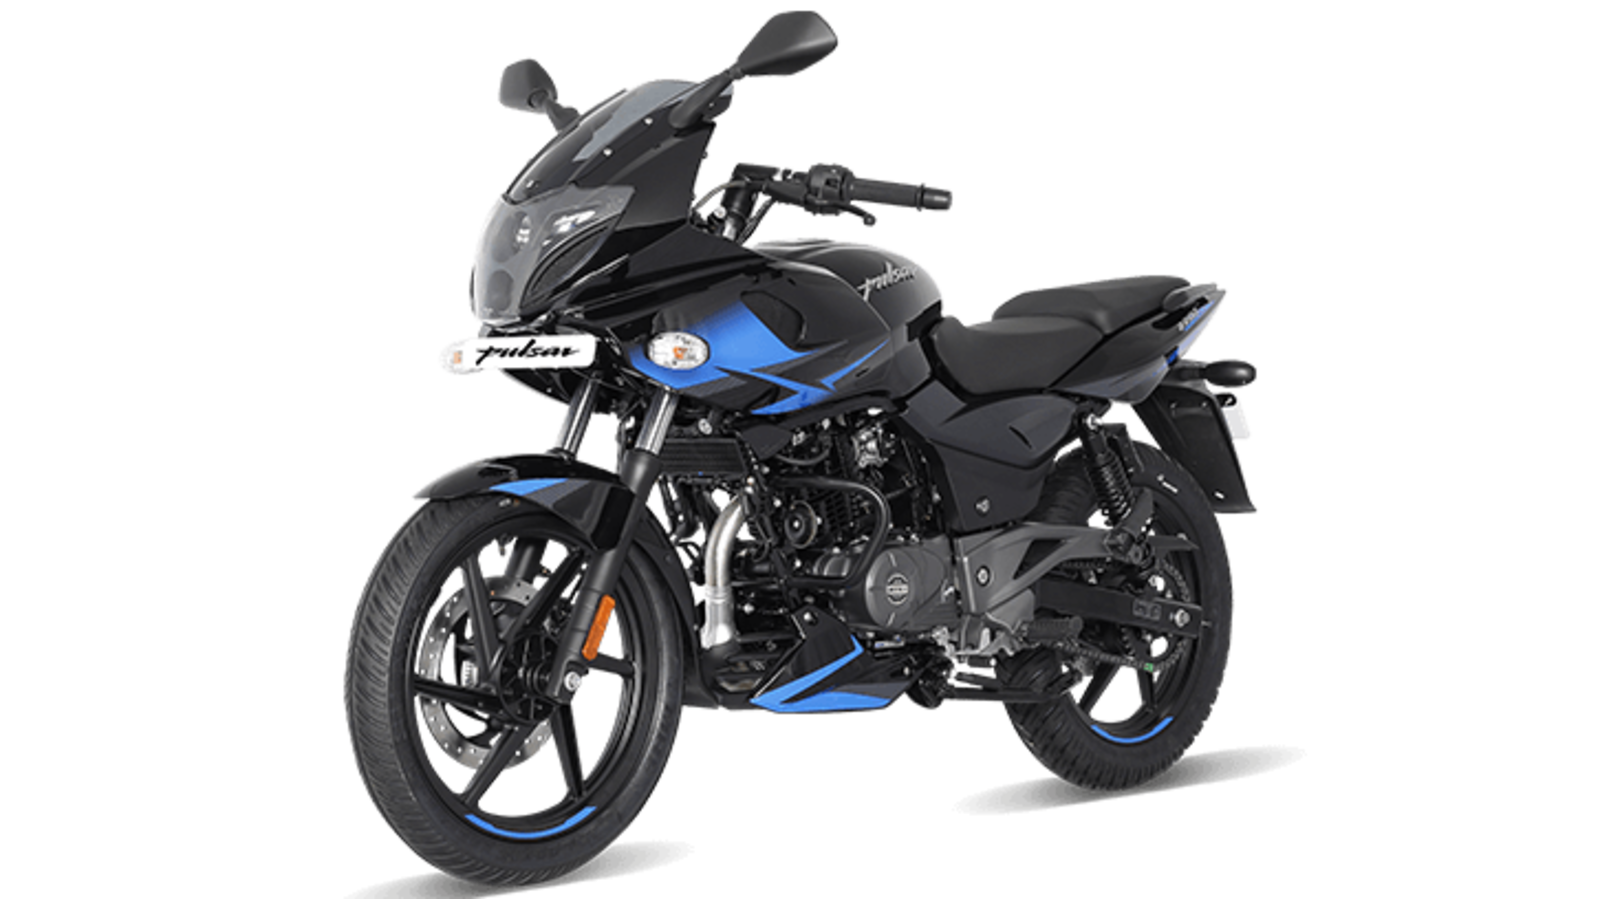 Bajaj Pulsar 220F BS 6 price goes up. Here are the details | HT Auto